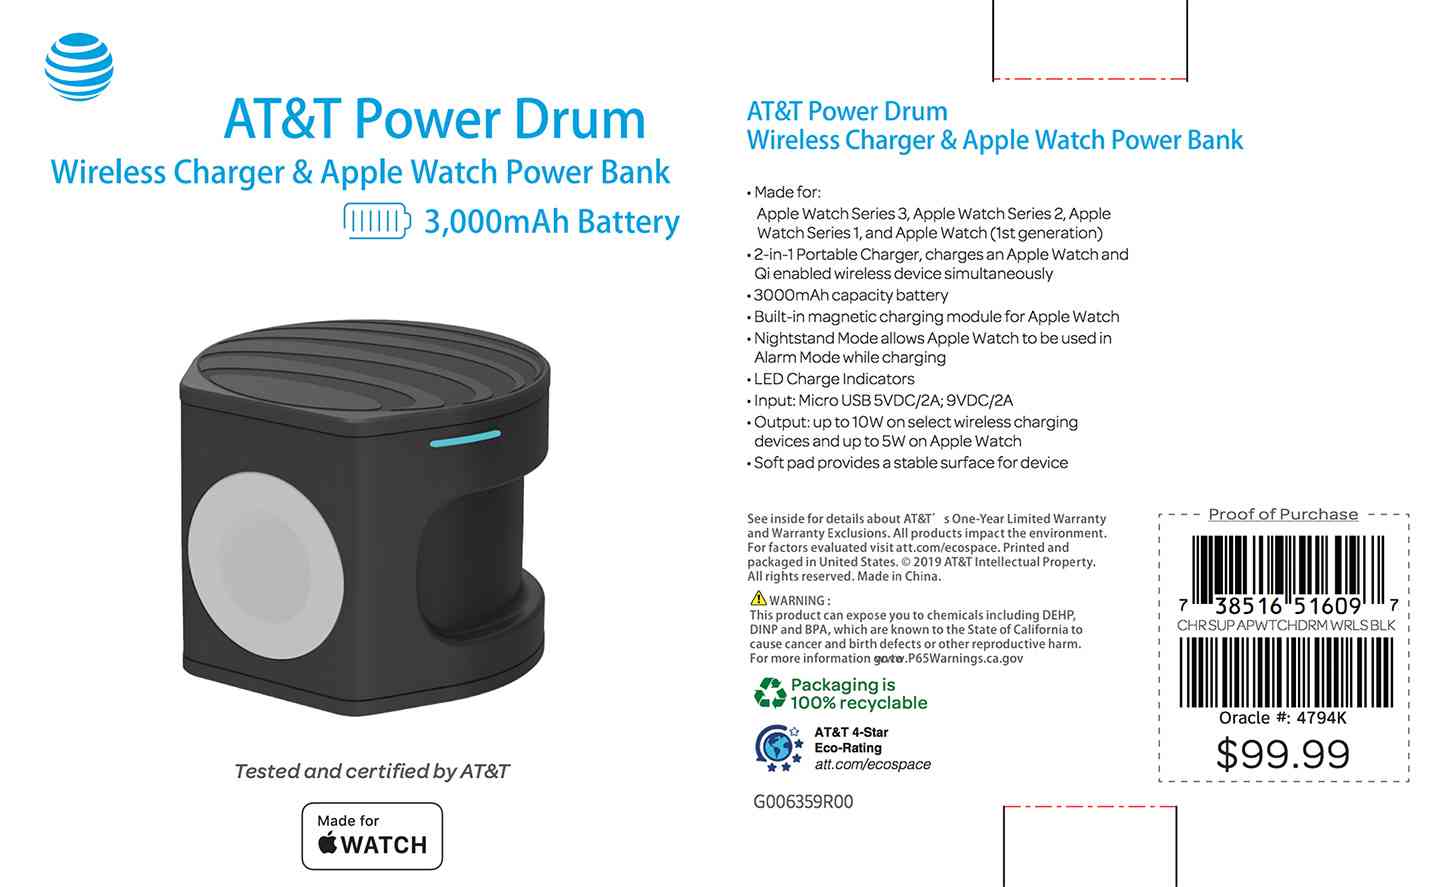 AT&T Power Drum price